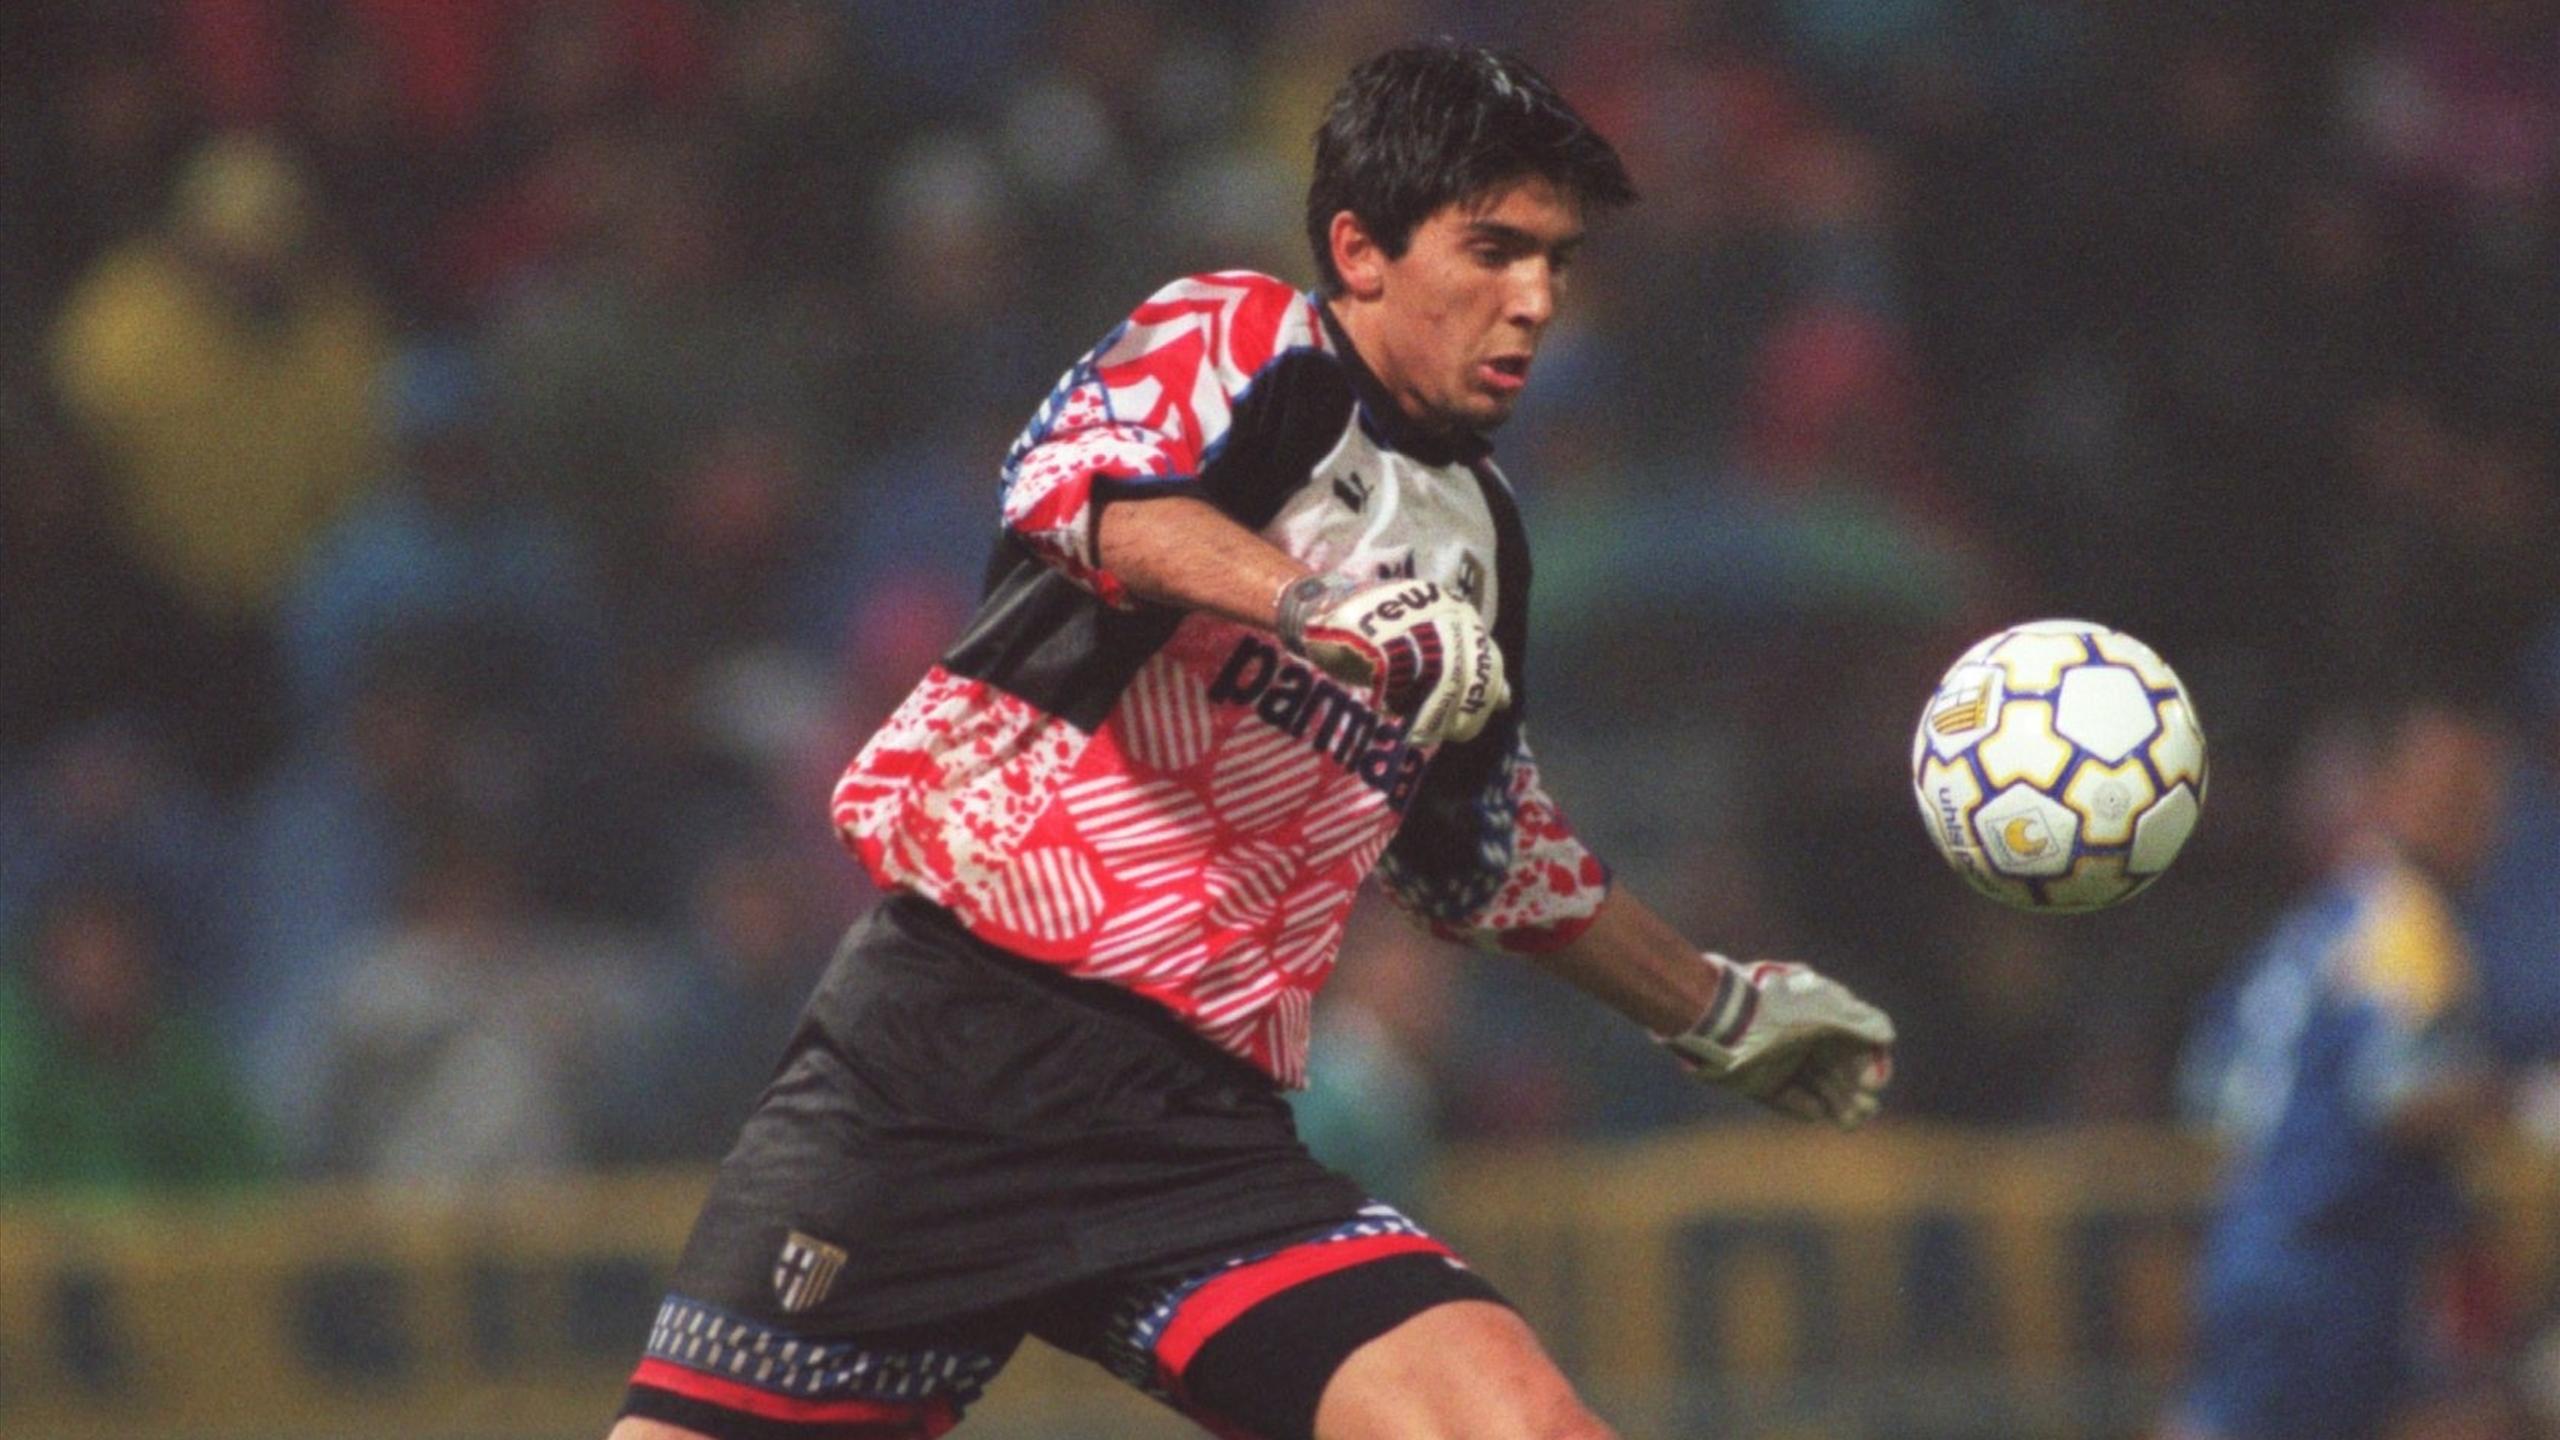 On November 11, 1995, Gianluigi Buffon shocked the world of football as he made his Serie A debut with Parma at 17, holding Milan onto a goalless draw